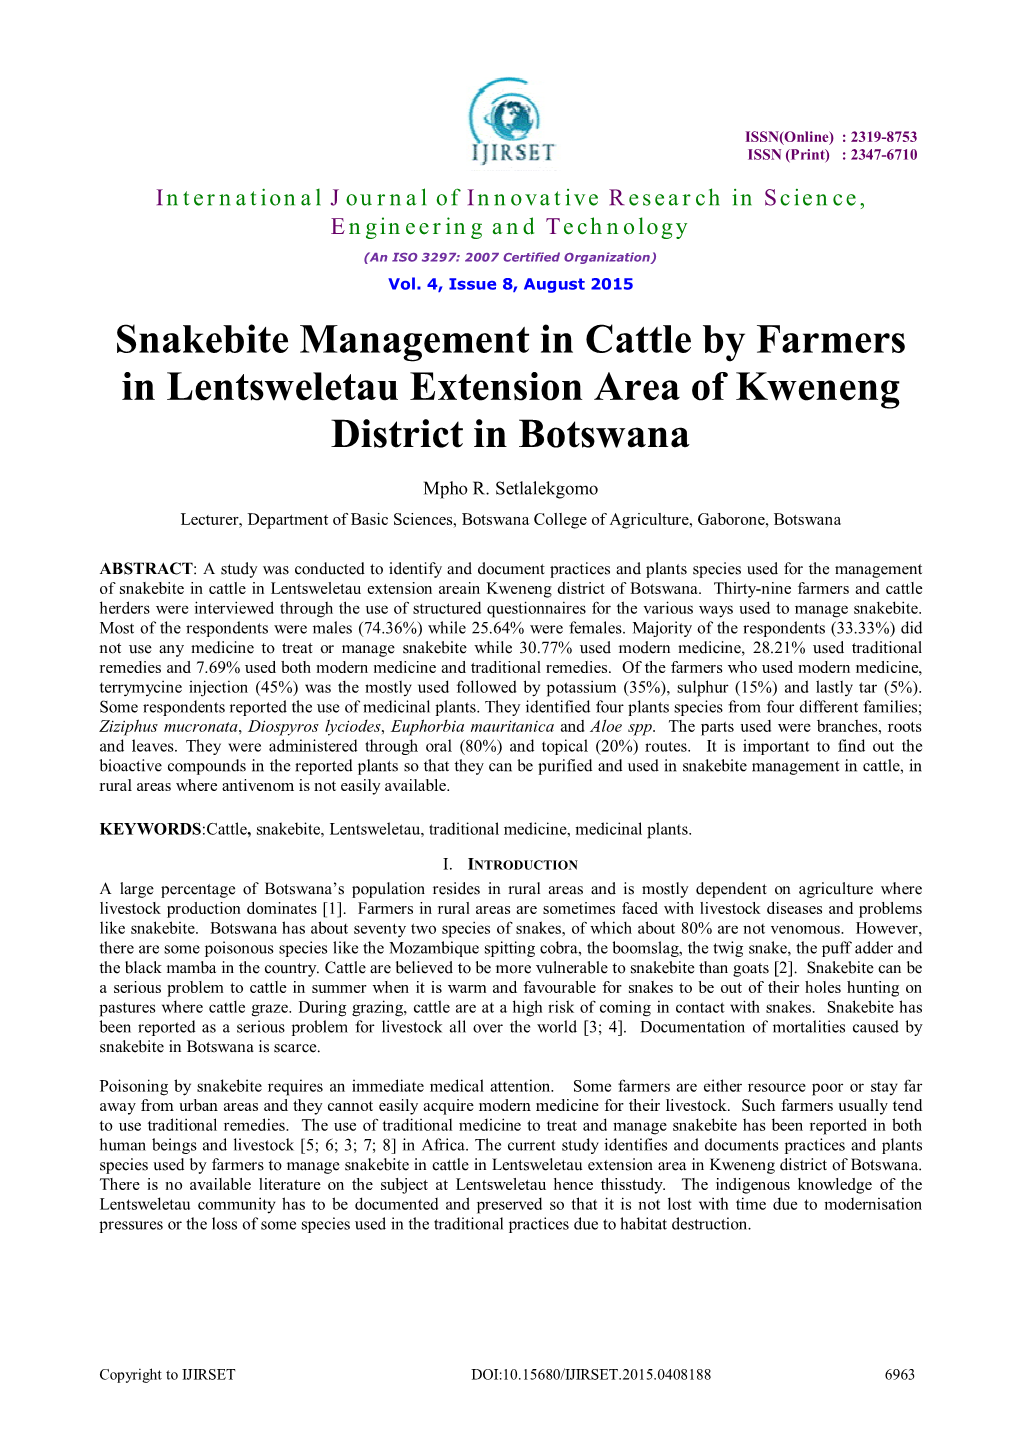 Snakebite Management in Cattle by Farmers in Lentsweletau Extension Area of Kweneng District in Botswana